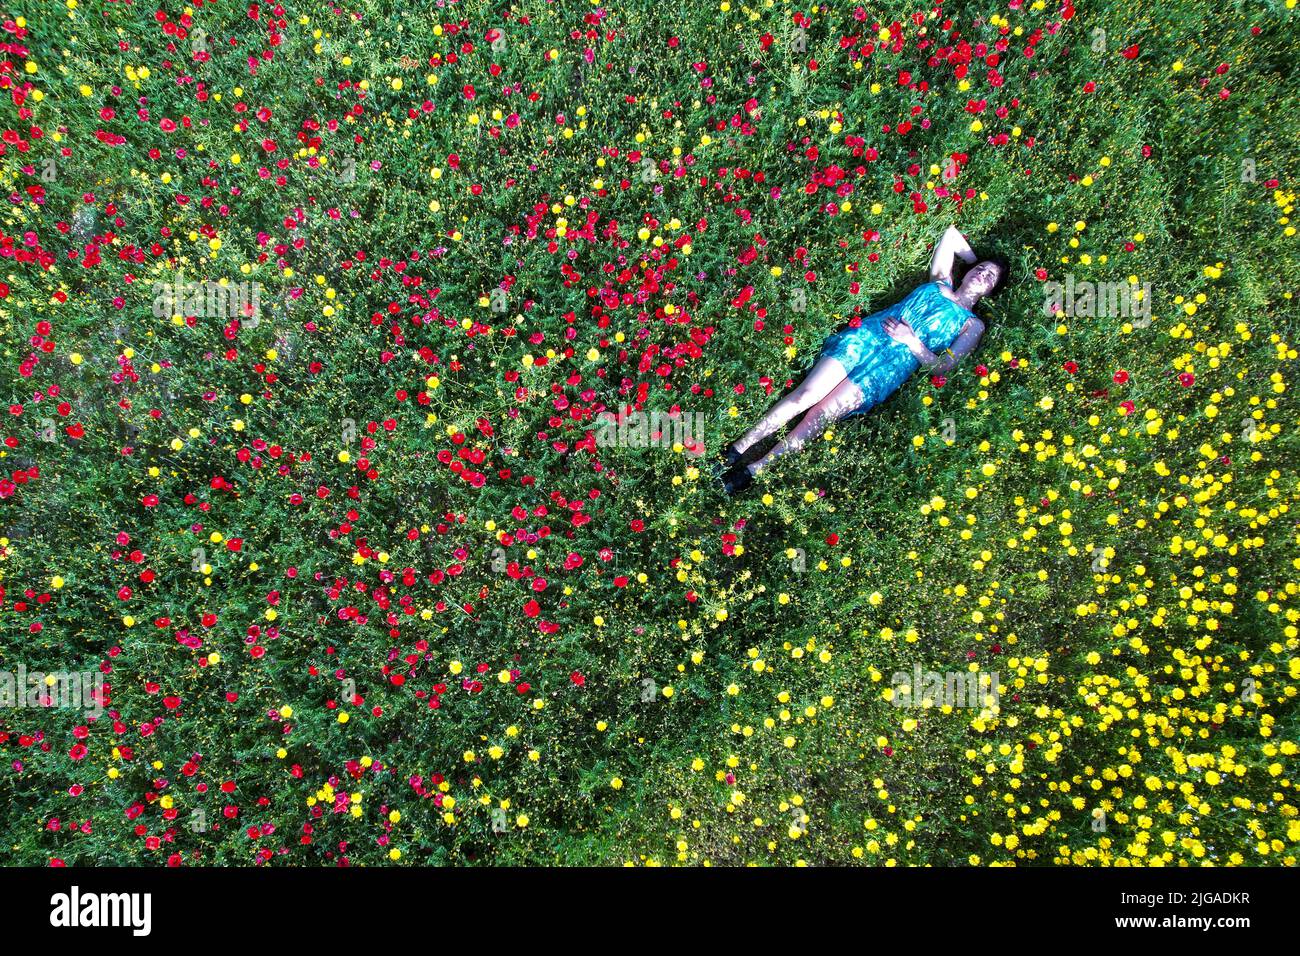 Aerial view of woman in red dress lying in a filed of red and yellow flowers Stock Photo